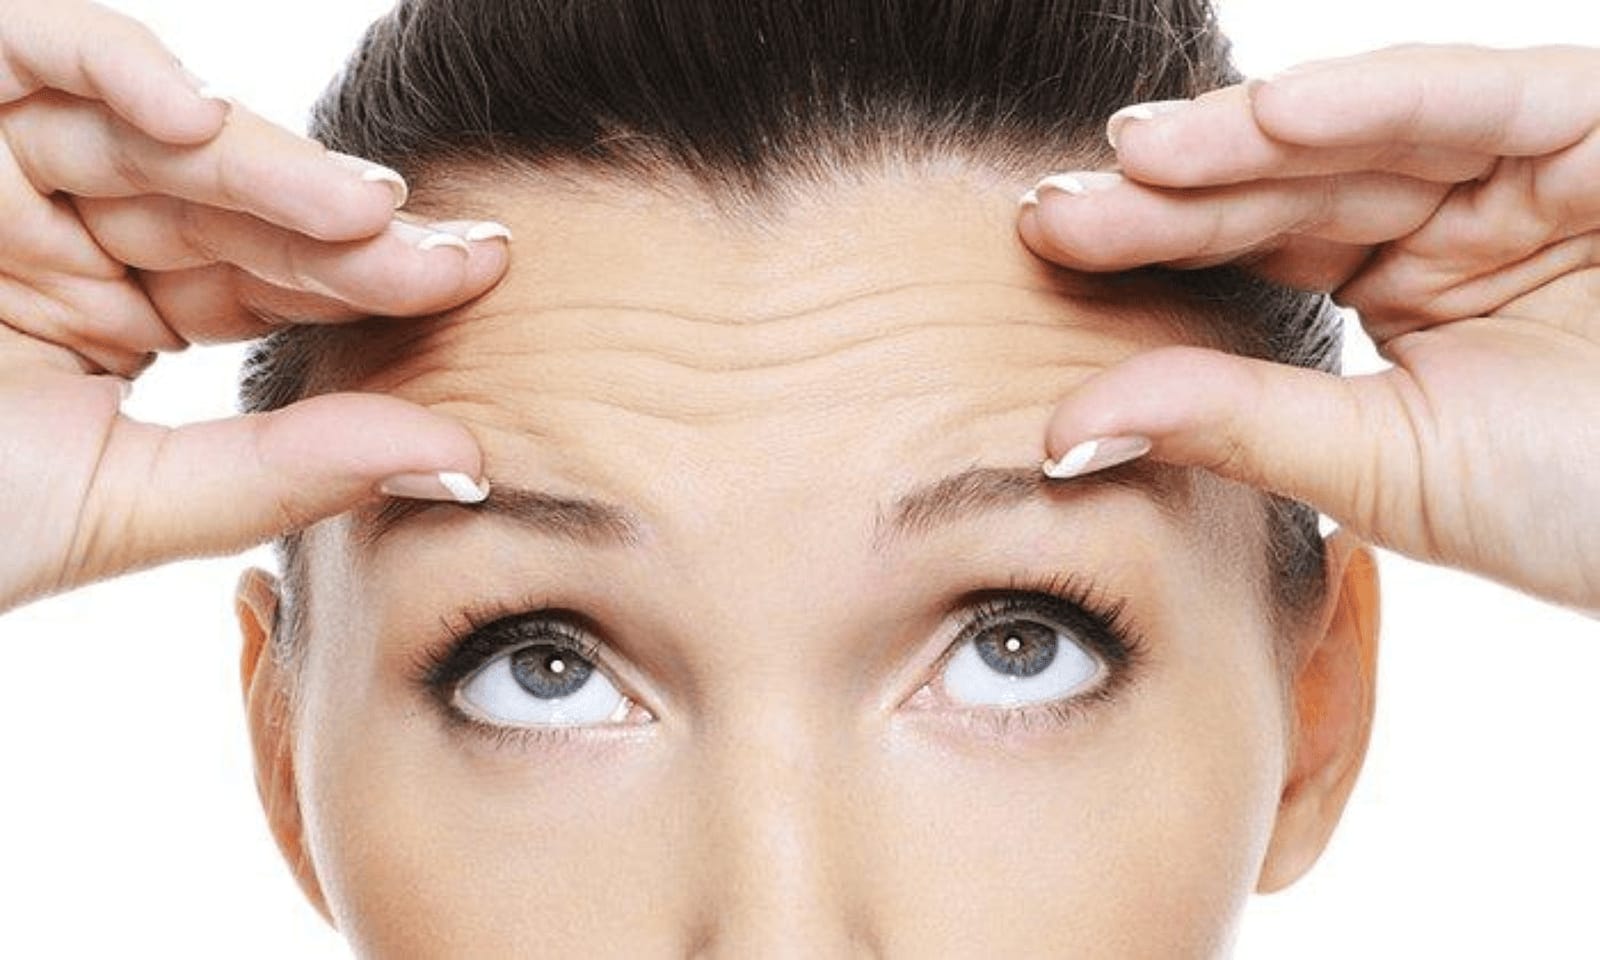 Skin wrinkles? Look 10 years younger with these home remedies